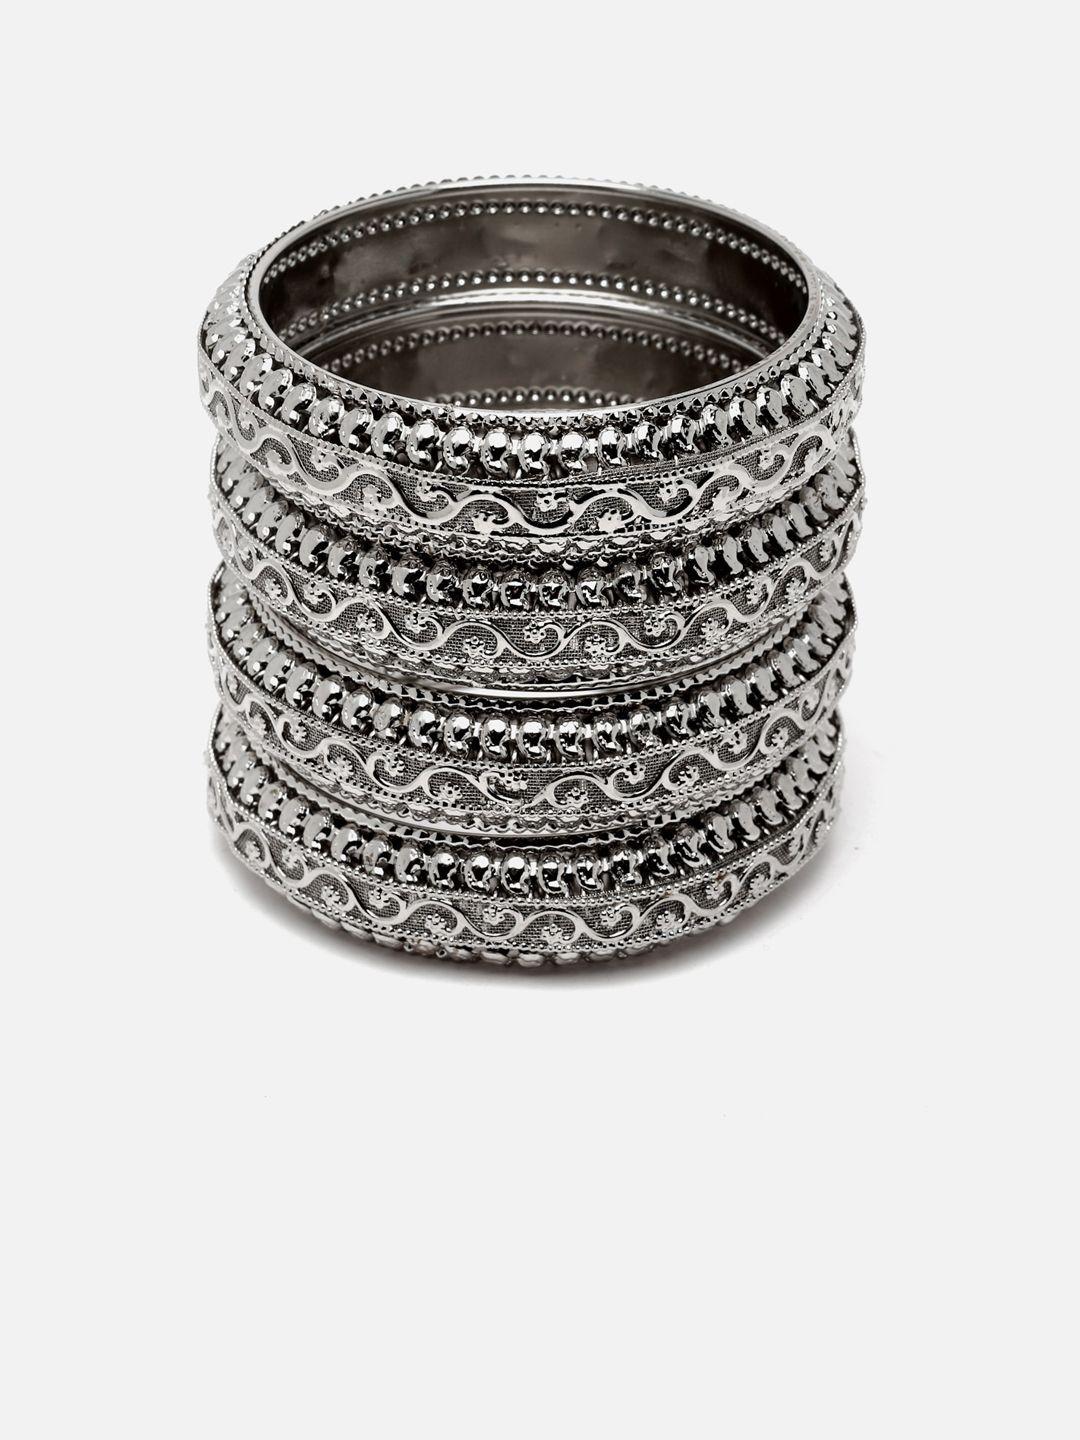 sangria set of 4 silver-plated textured oxidised bangles